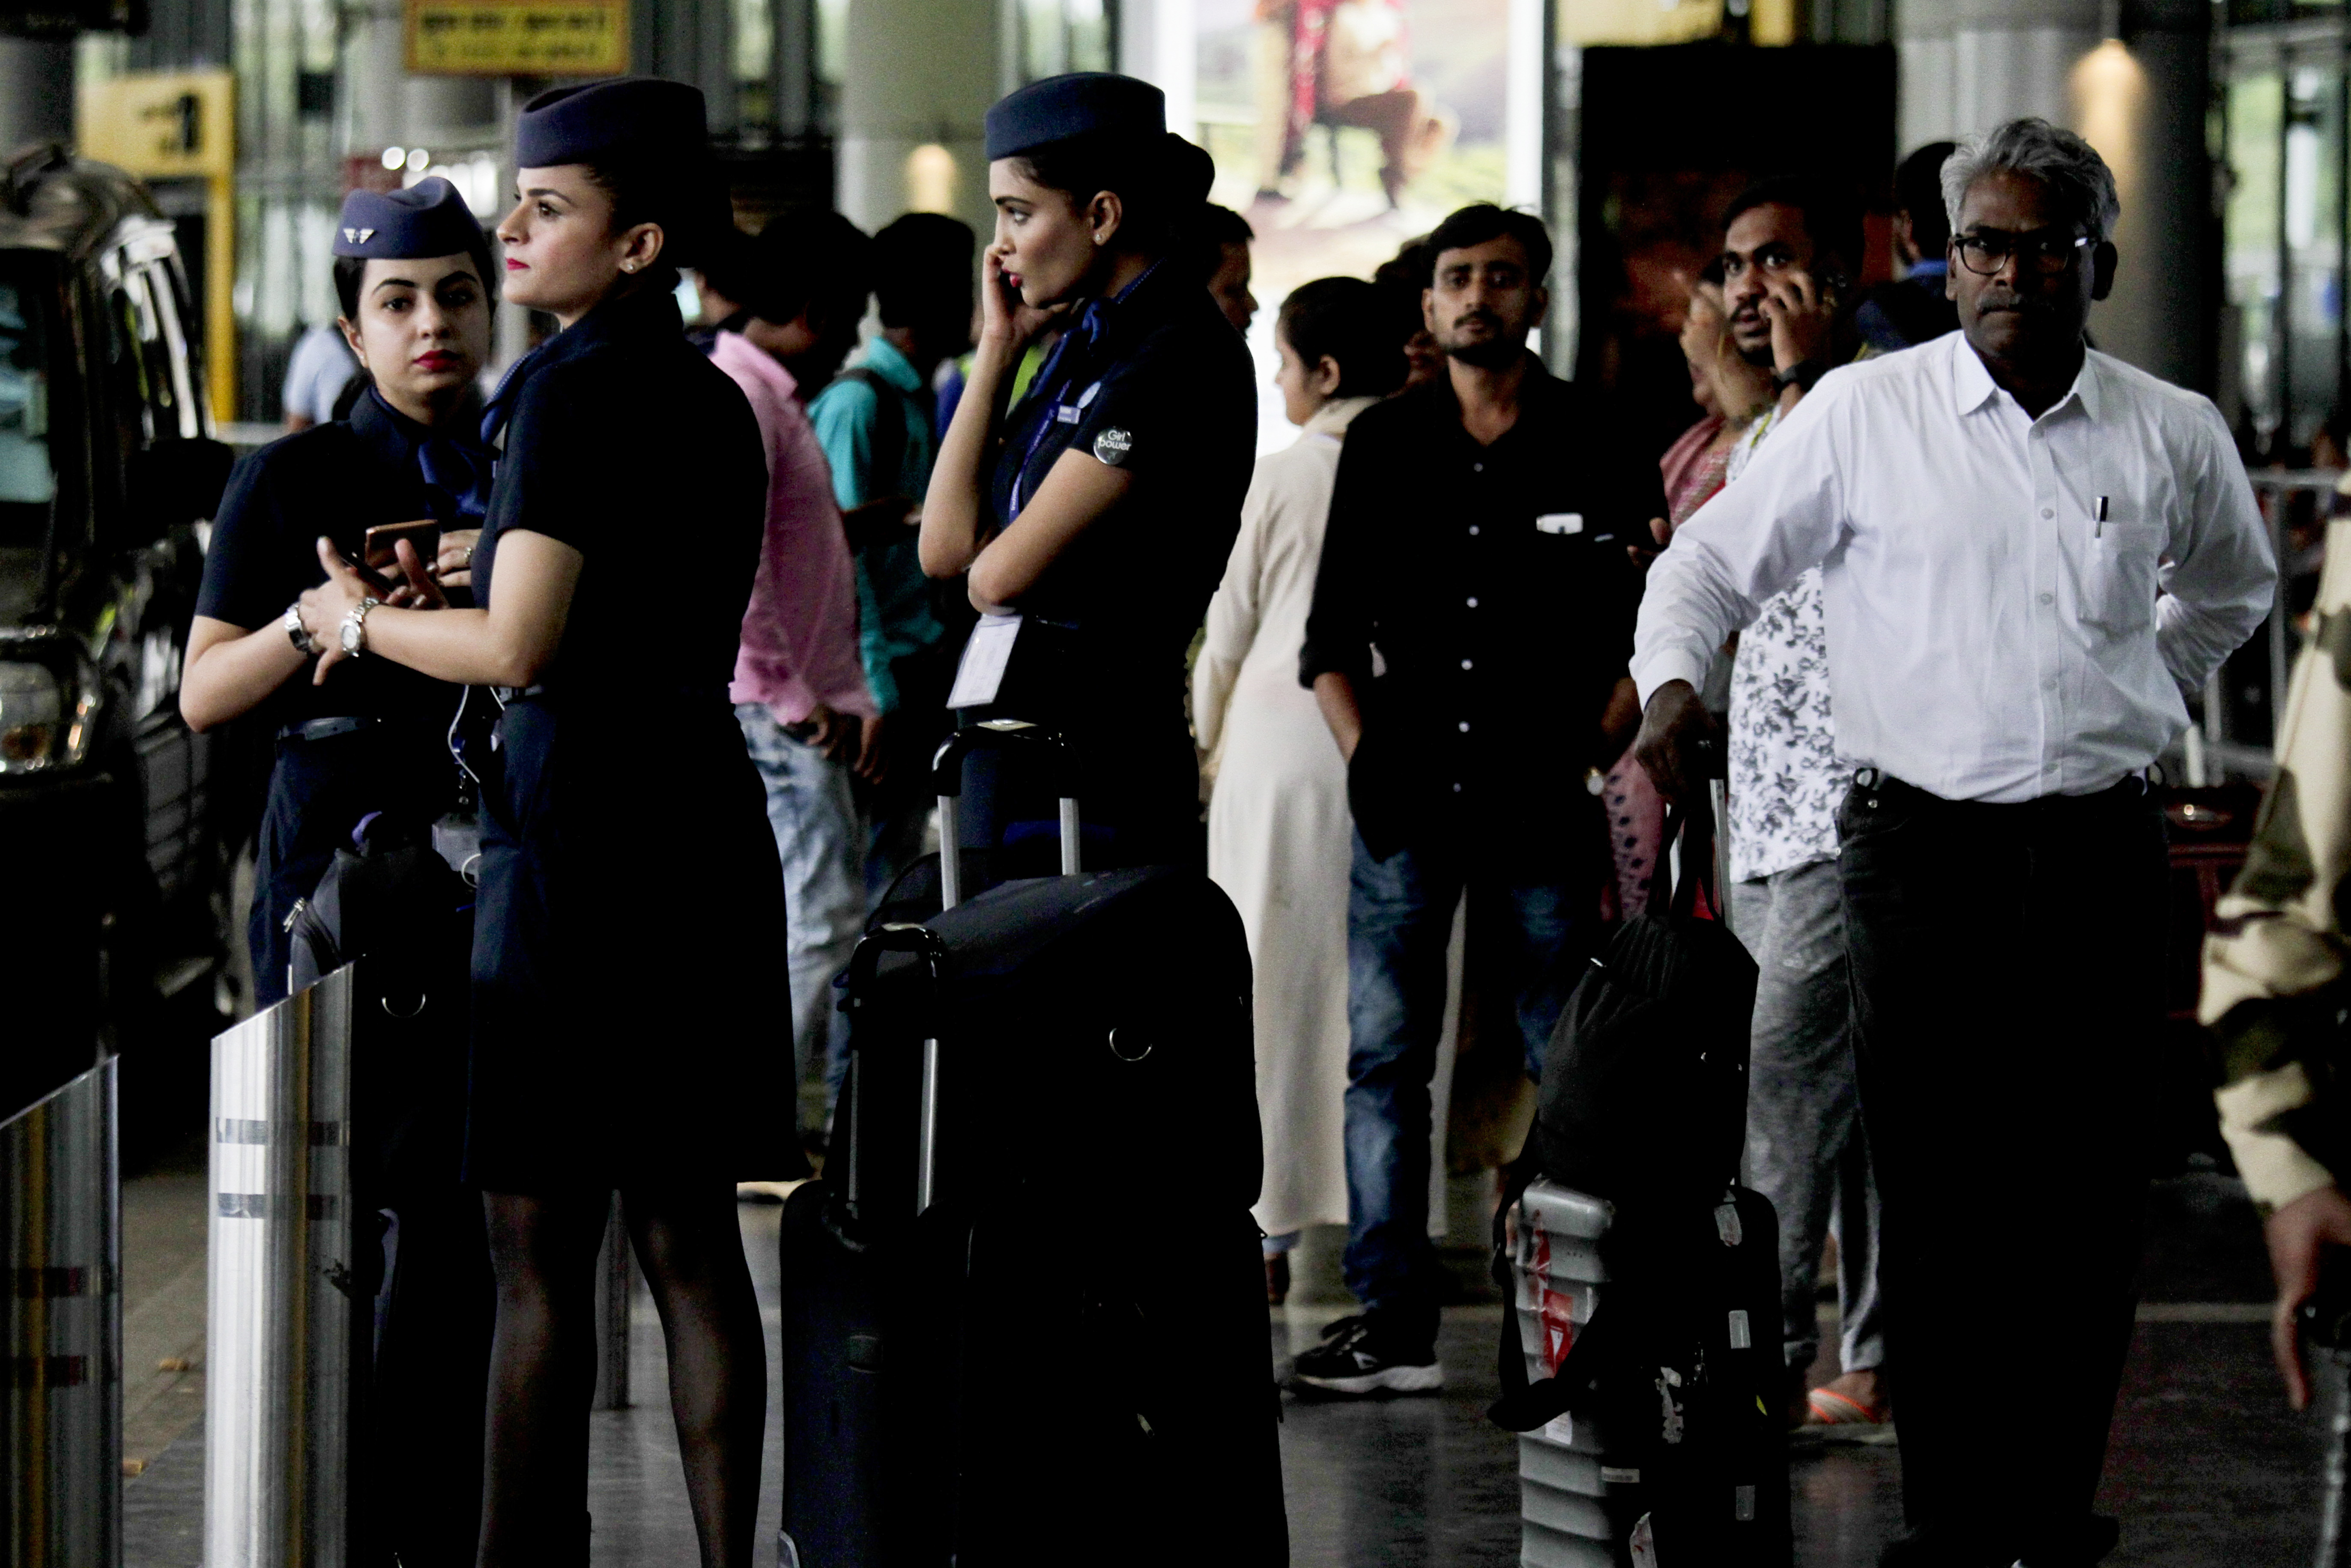 Stewardess and stranded passengers wait outside the Netaji Subhas Chandra Bose international airport after all flights were suspended following cyclone Fani landfall in eastern coast, in Kolkata, India, Friday, May 3, 2019. Cyclone Fani has made landfall on India's eastern coast as a grade 5 storm, lashing the emptied beaches with rain and wind gusting up to 205 kilometers (127 miles) per hour. (AP Photo/Bikas Das)